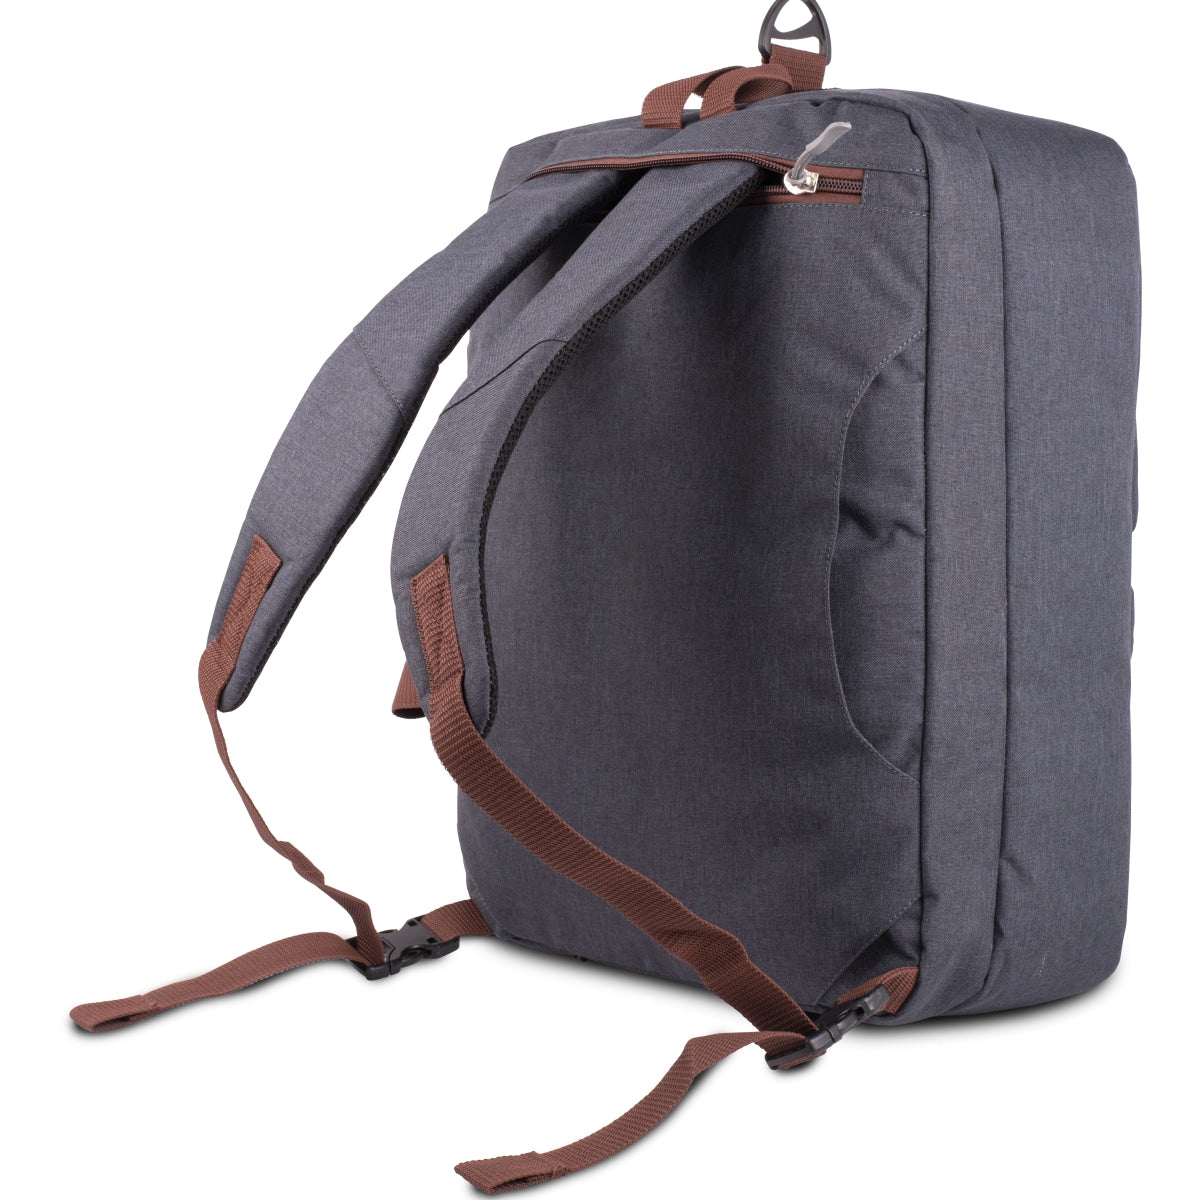 2in1 Gray Laptop Sling cum Backpack - For Employees, Travelers, Corporate, Client or Dealer Gifting, Events Promotional Freebies BGS41